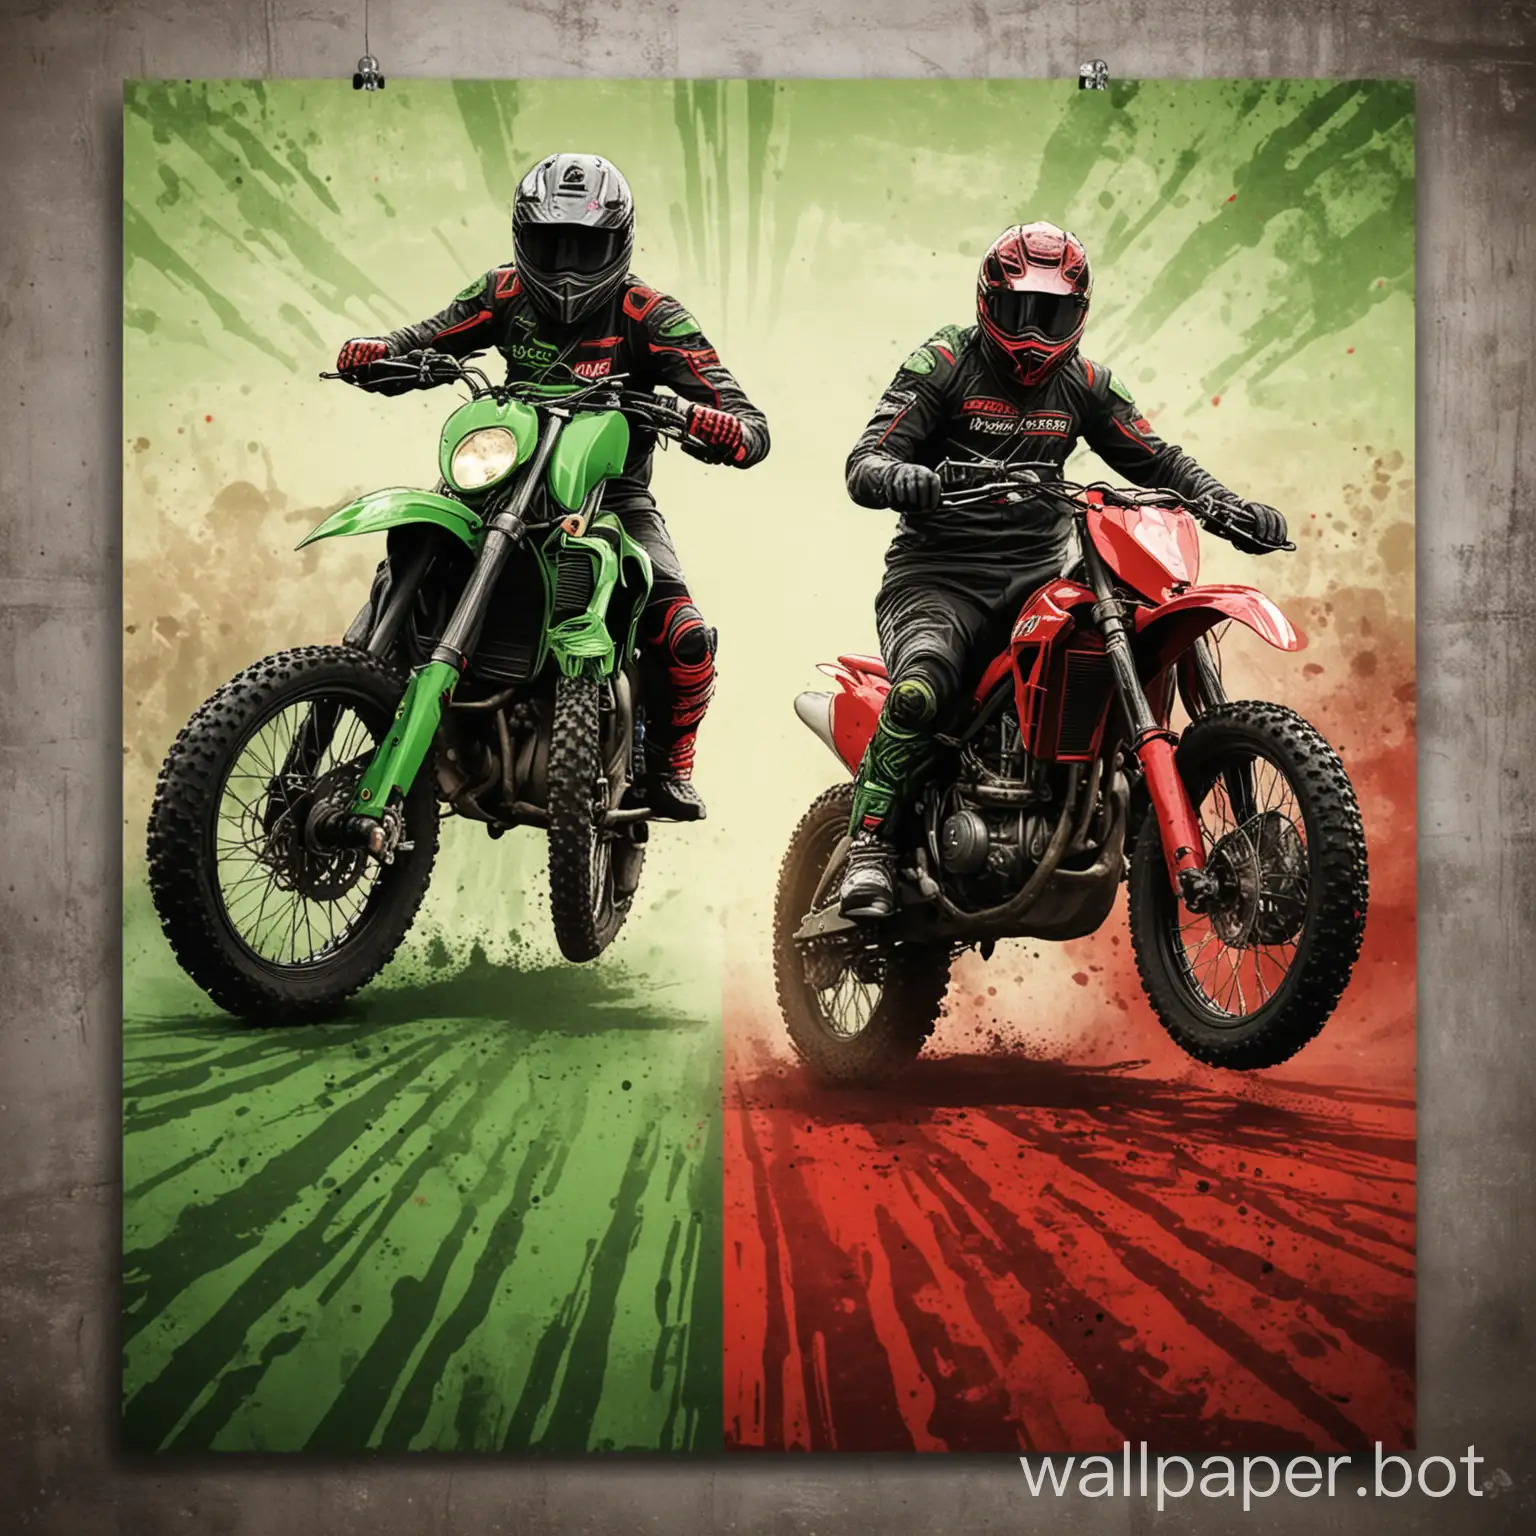 Dynamic-Moto-Race-Poster-with-Two-Bikers-in-Green-and-Red